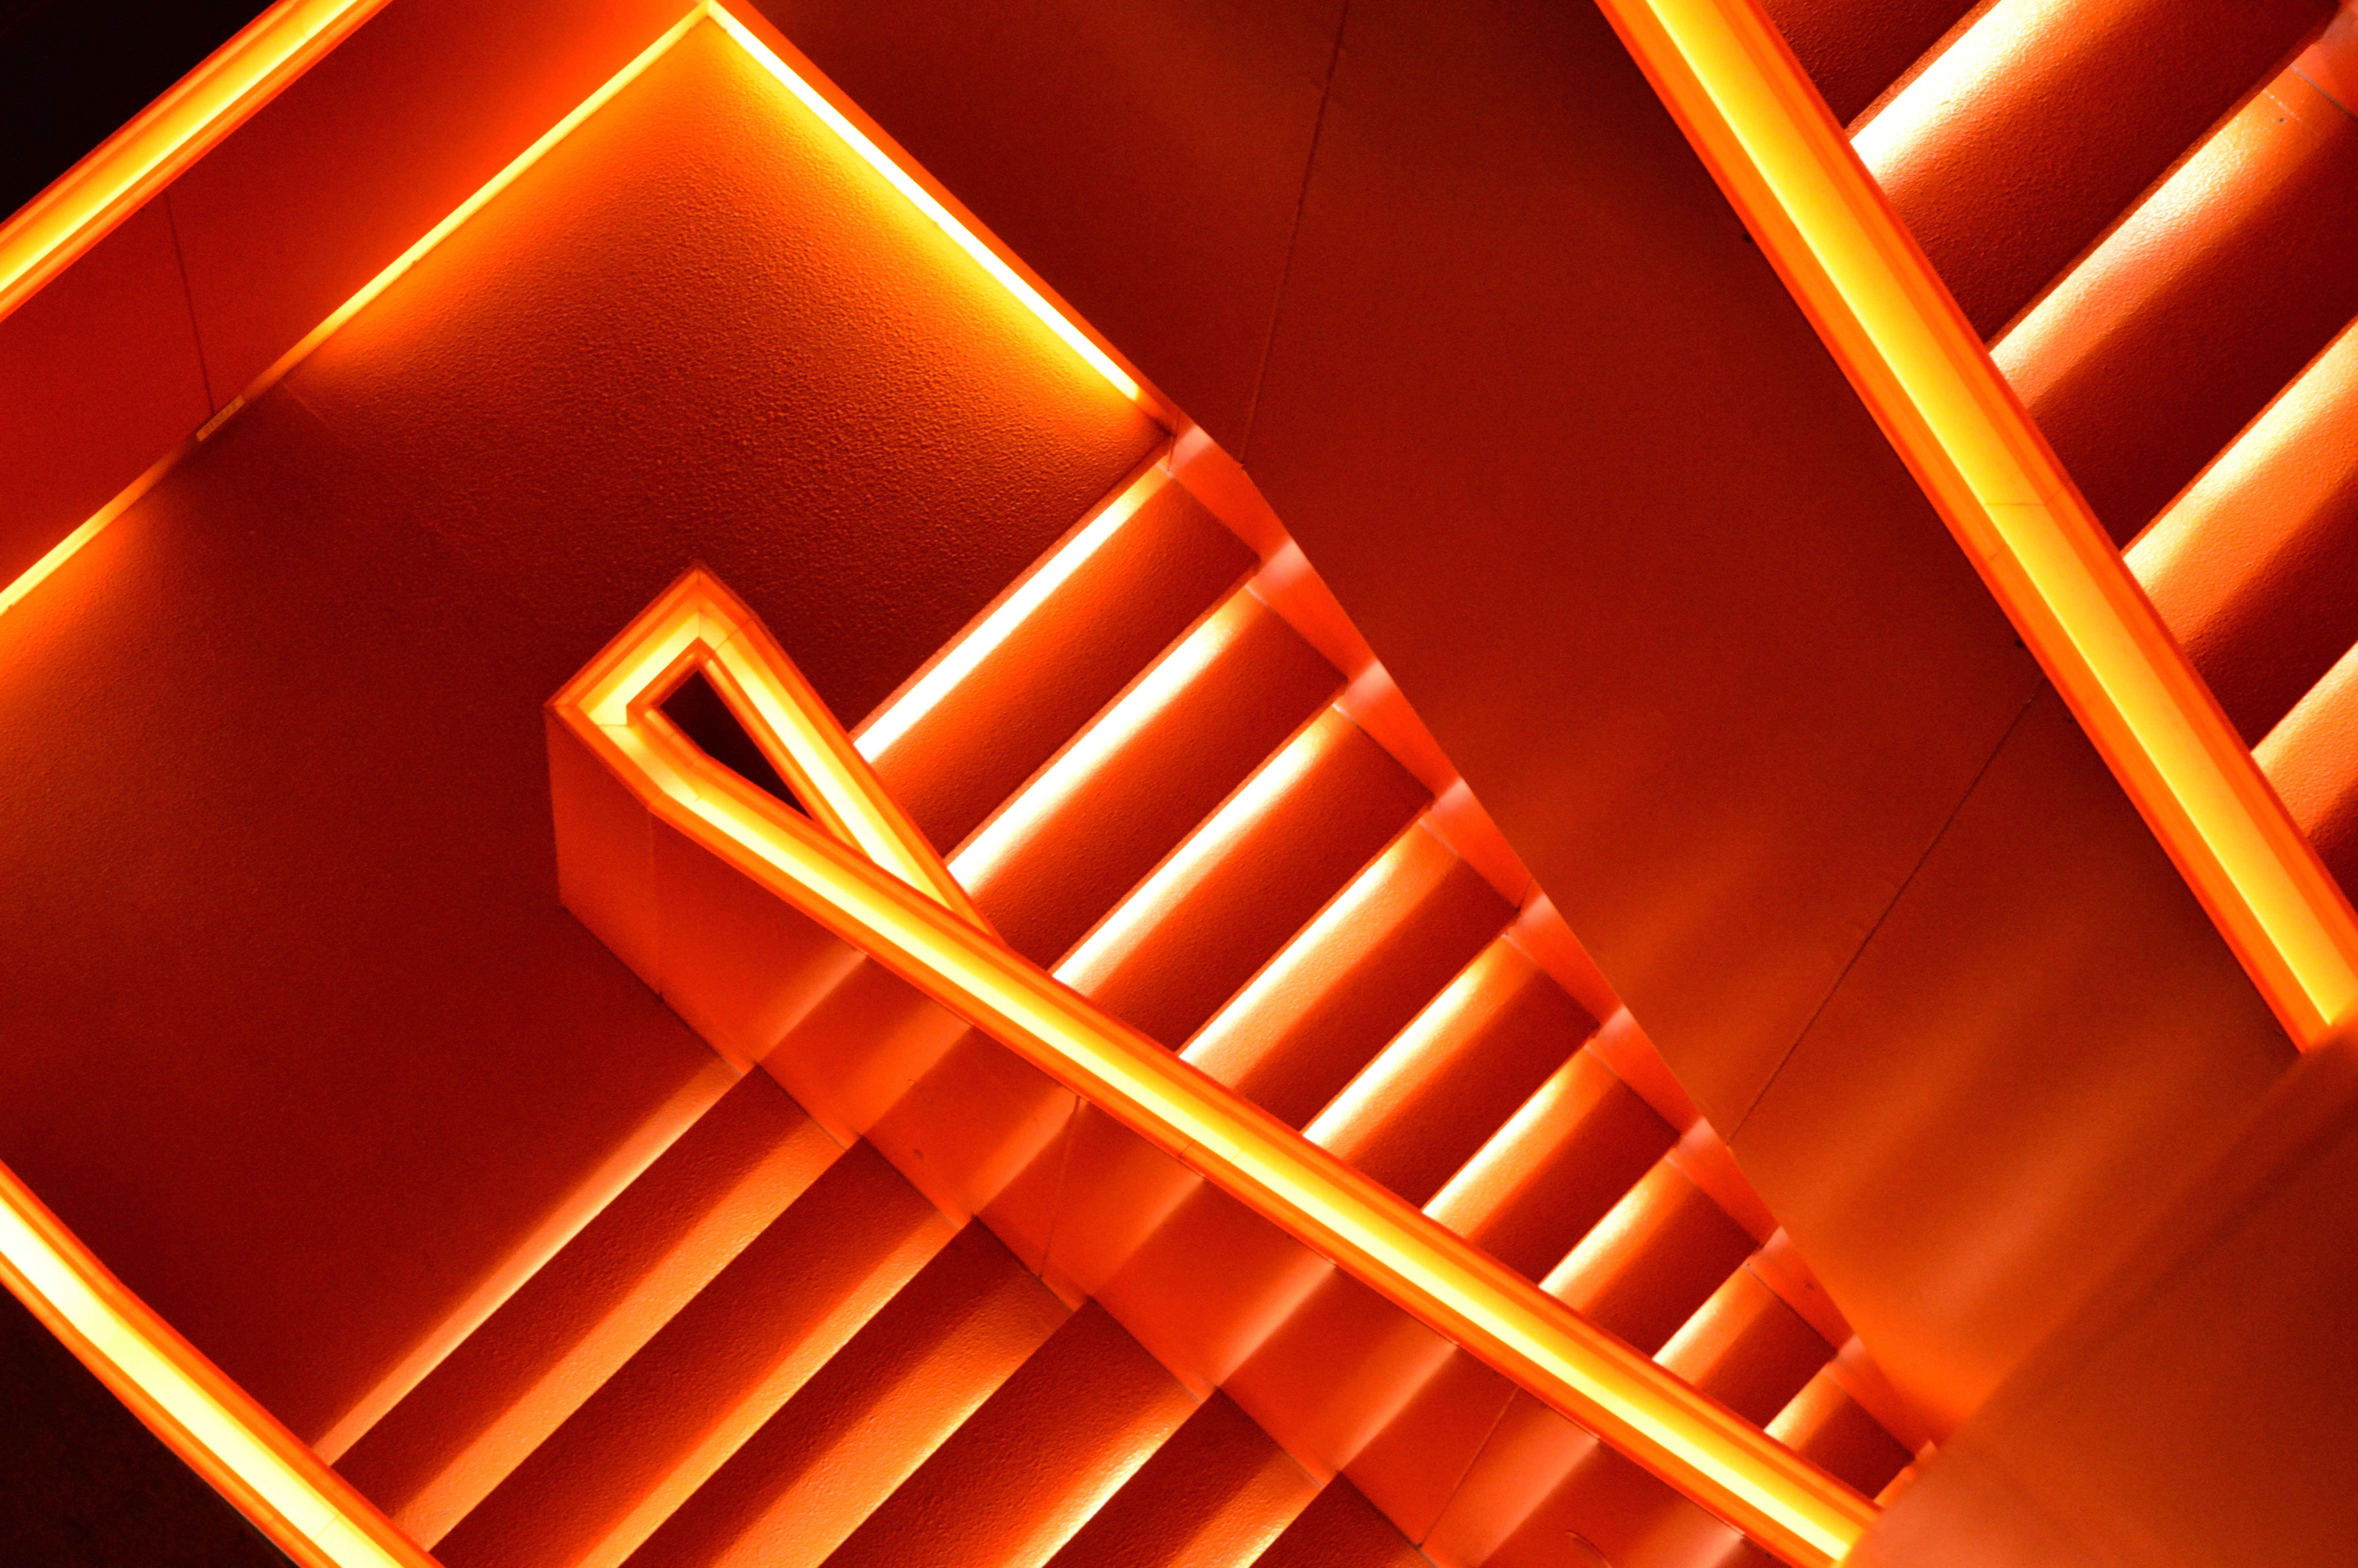 A photograph of a staircase with orange lights. - Neon orange